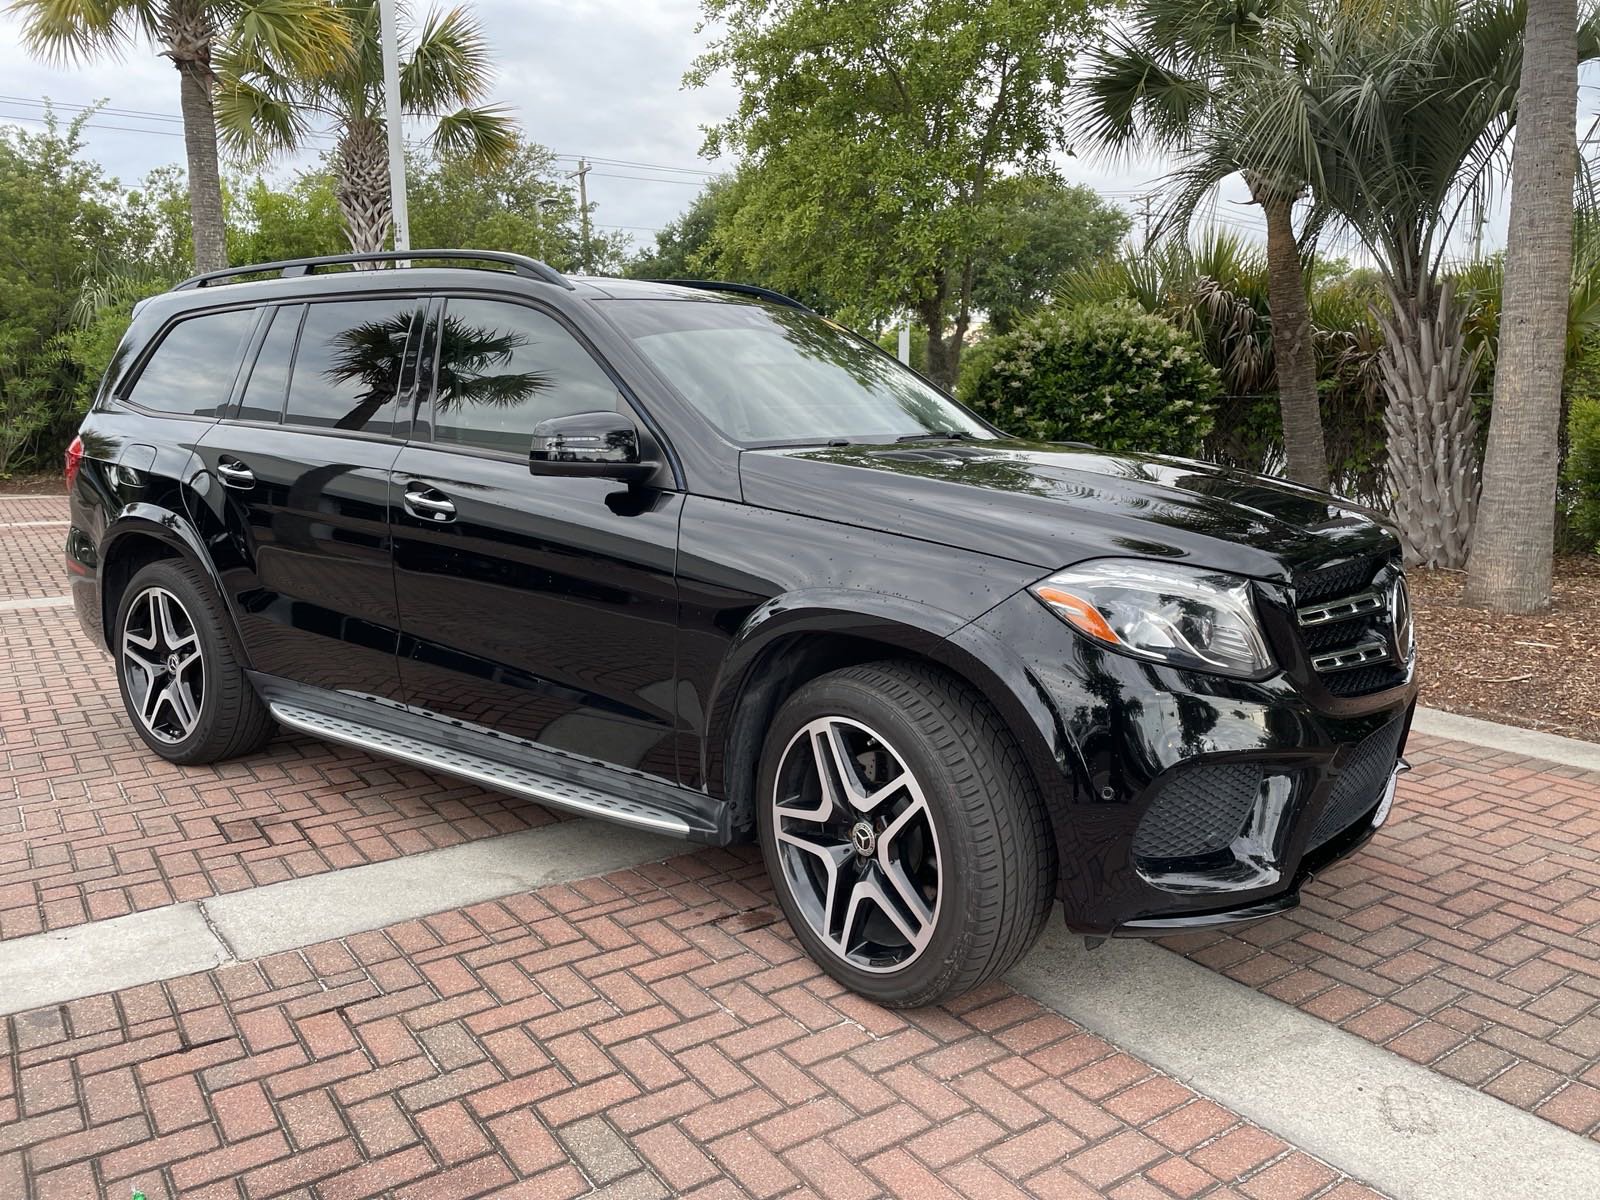 Pre-Owned 2018 Mercedes-Benz GLS 550 SUV in Merriam #XH34843A | Hendrick  Chevrolet Shawnee Mission